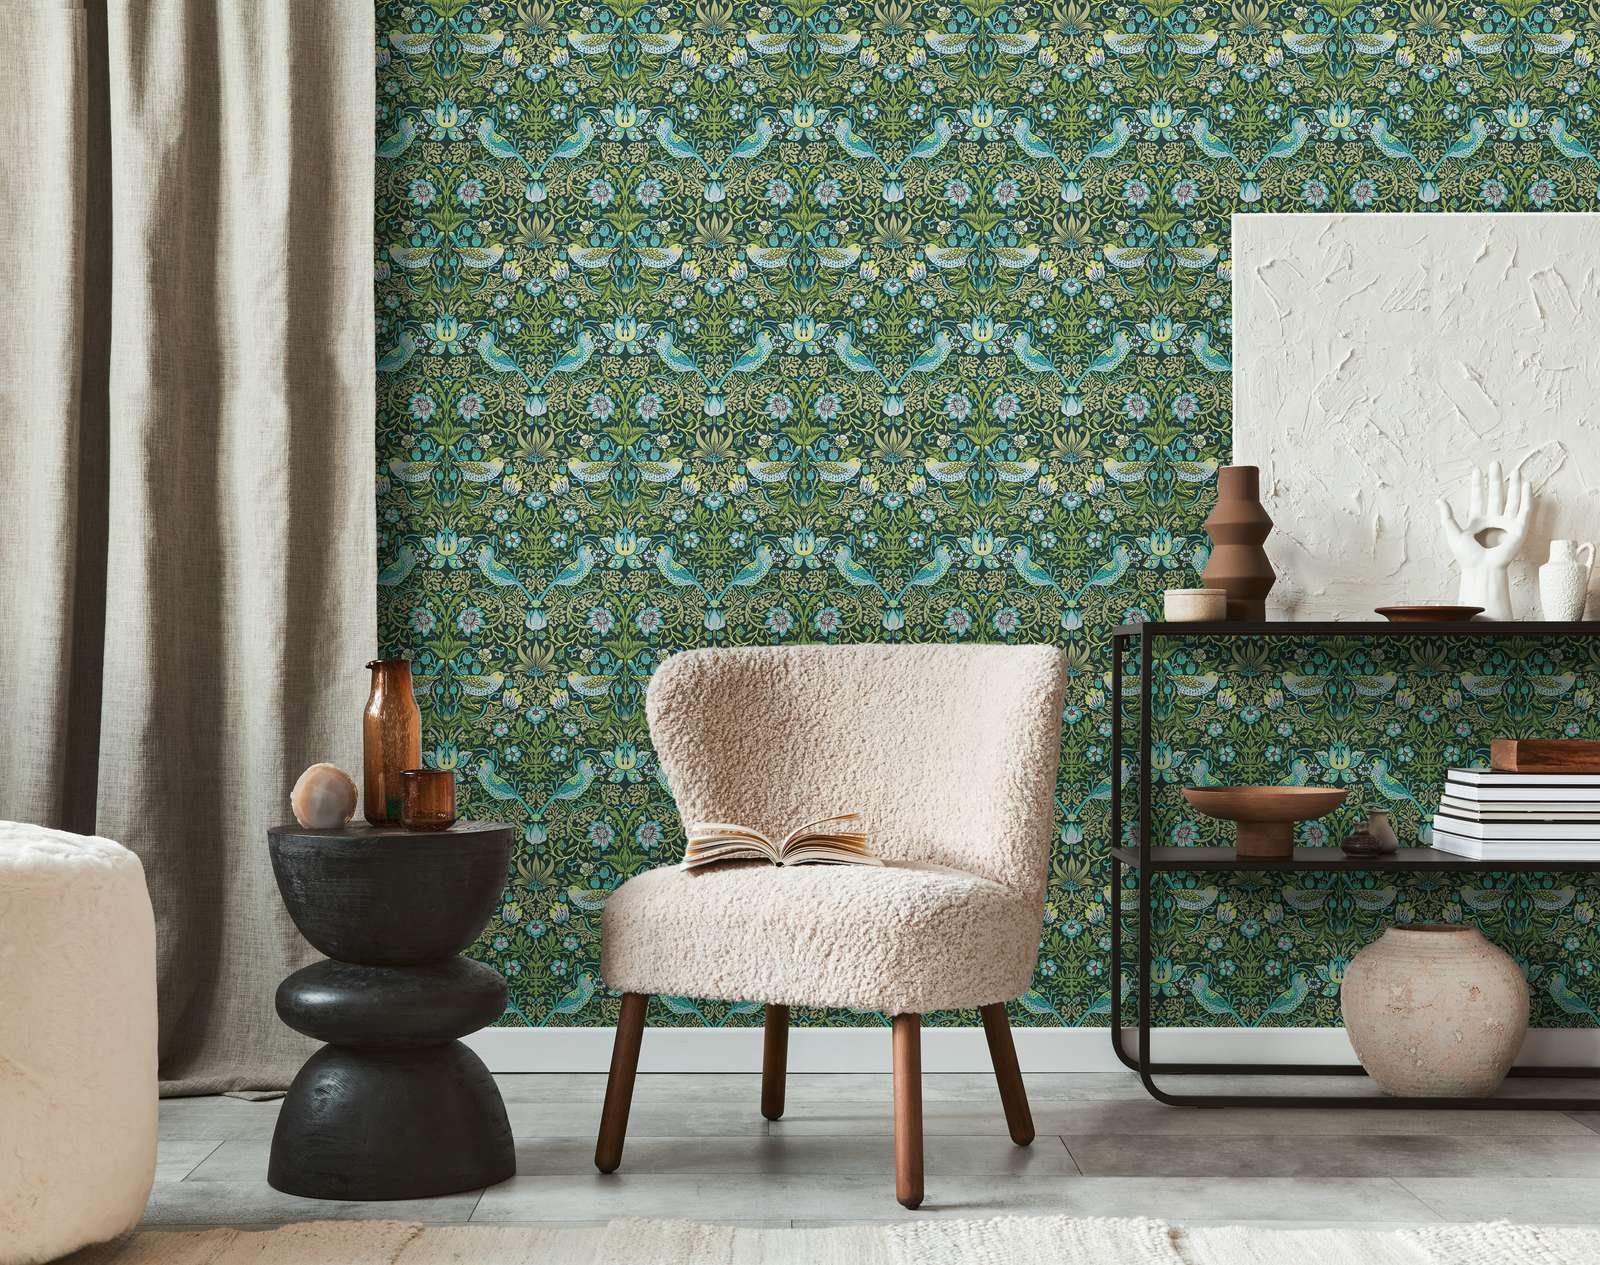             Non-woven wallpaper floral pattern with birds - green, blue, black
        